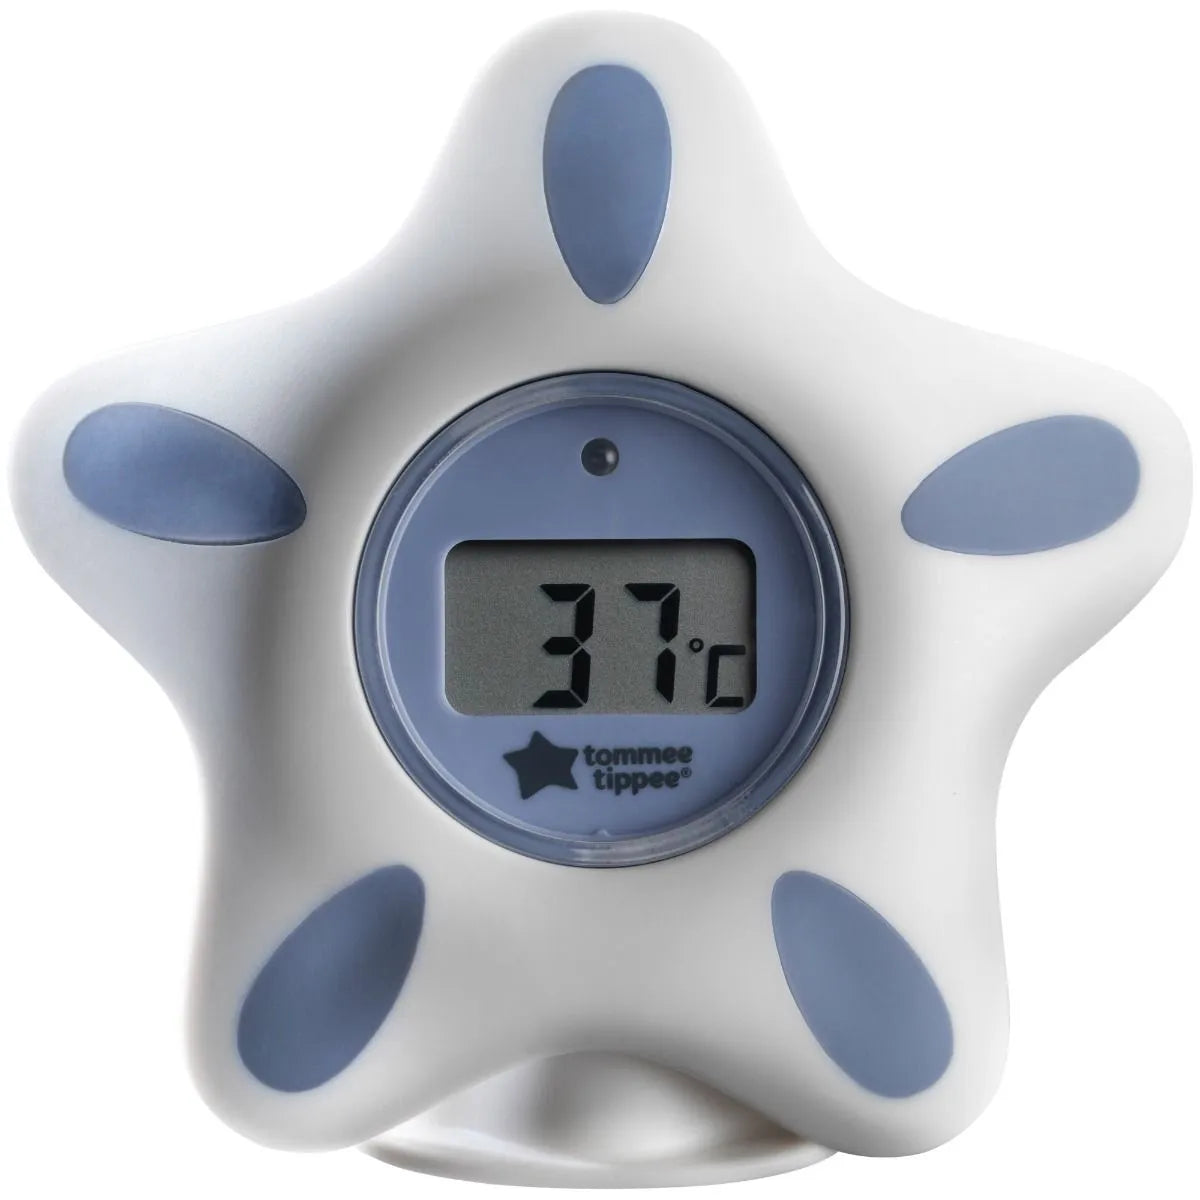 Tommee Tippee InBath Digital Baby Bath and Room Thermometer